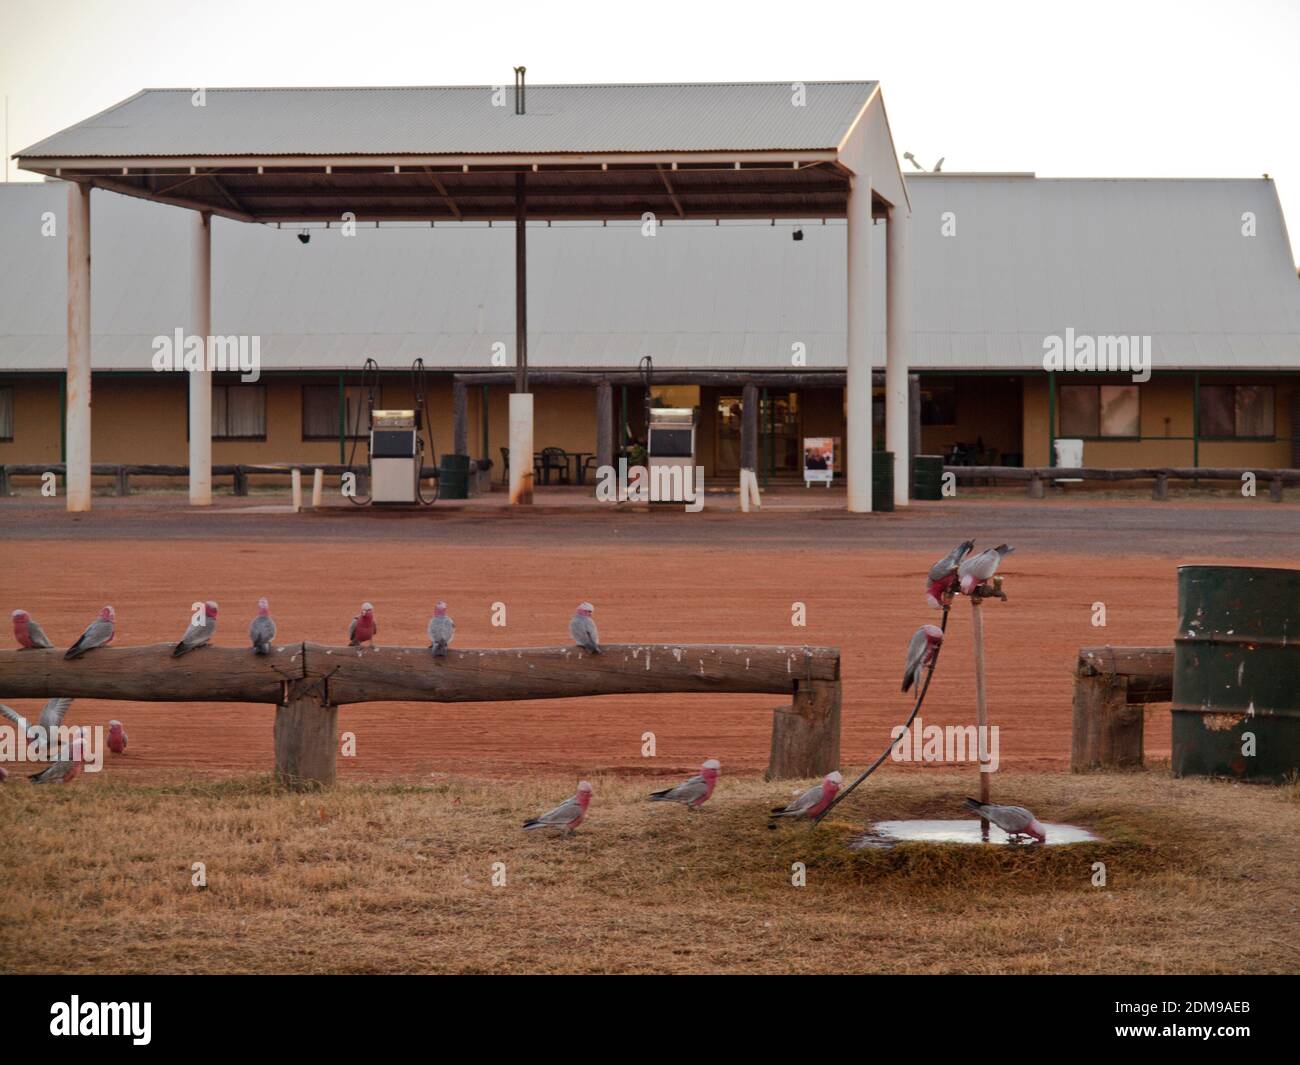 Galahs (Cacatua rosiecapilla) perched on a wooden fence waiting their turn to drink at a puddle, Tilmouth Well Roadhouse, Tanami Road, NT. Stock Photo